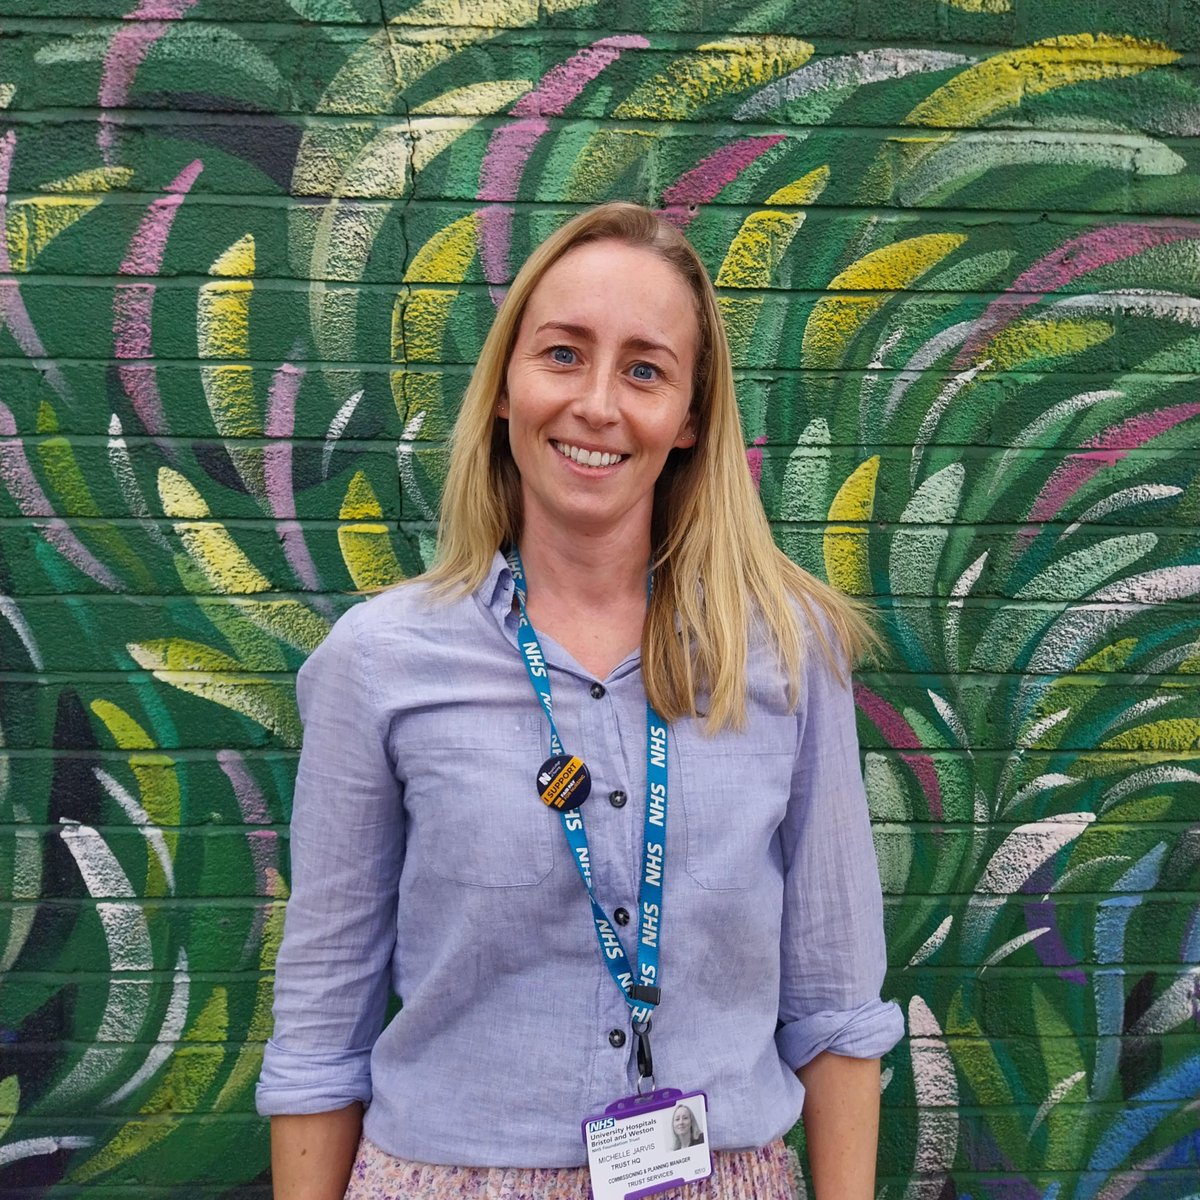 Meet Michelle, our new @CHDNetworkSWSW Network Manager! 😀 Michelle is looking forward to working together with all our partners to help contribute to the overall aim of providing high quality, equitable care for all #CHD patients. Find out more 👉 swswchd.co.uk/en/page/who-we… #NHS